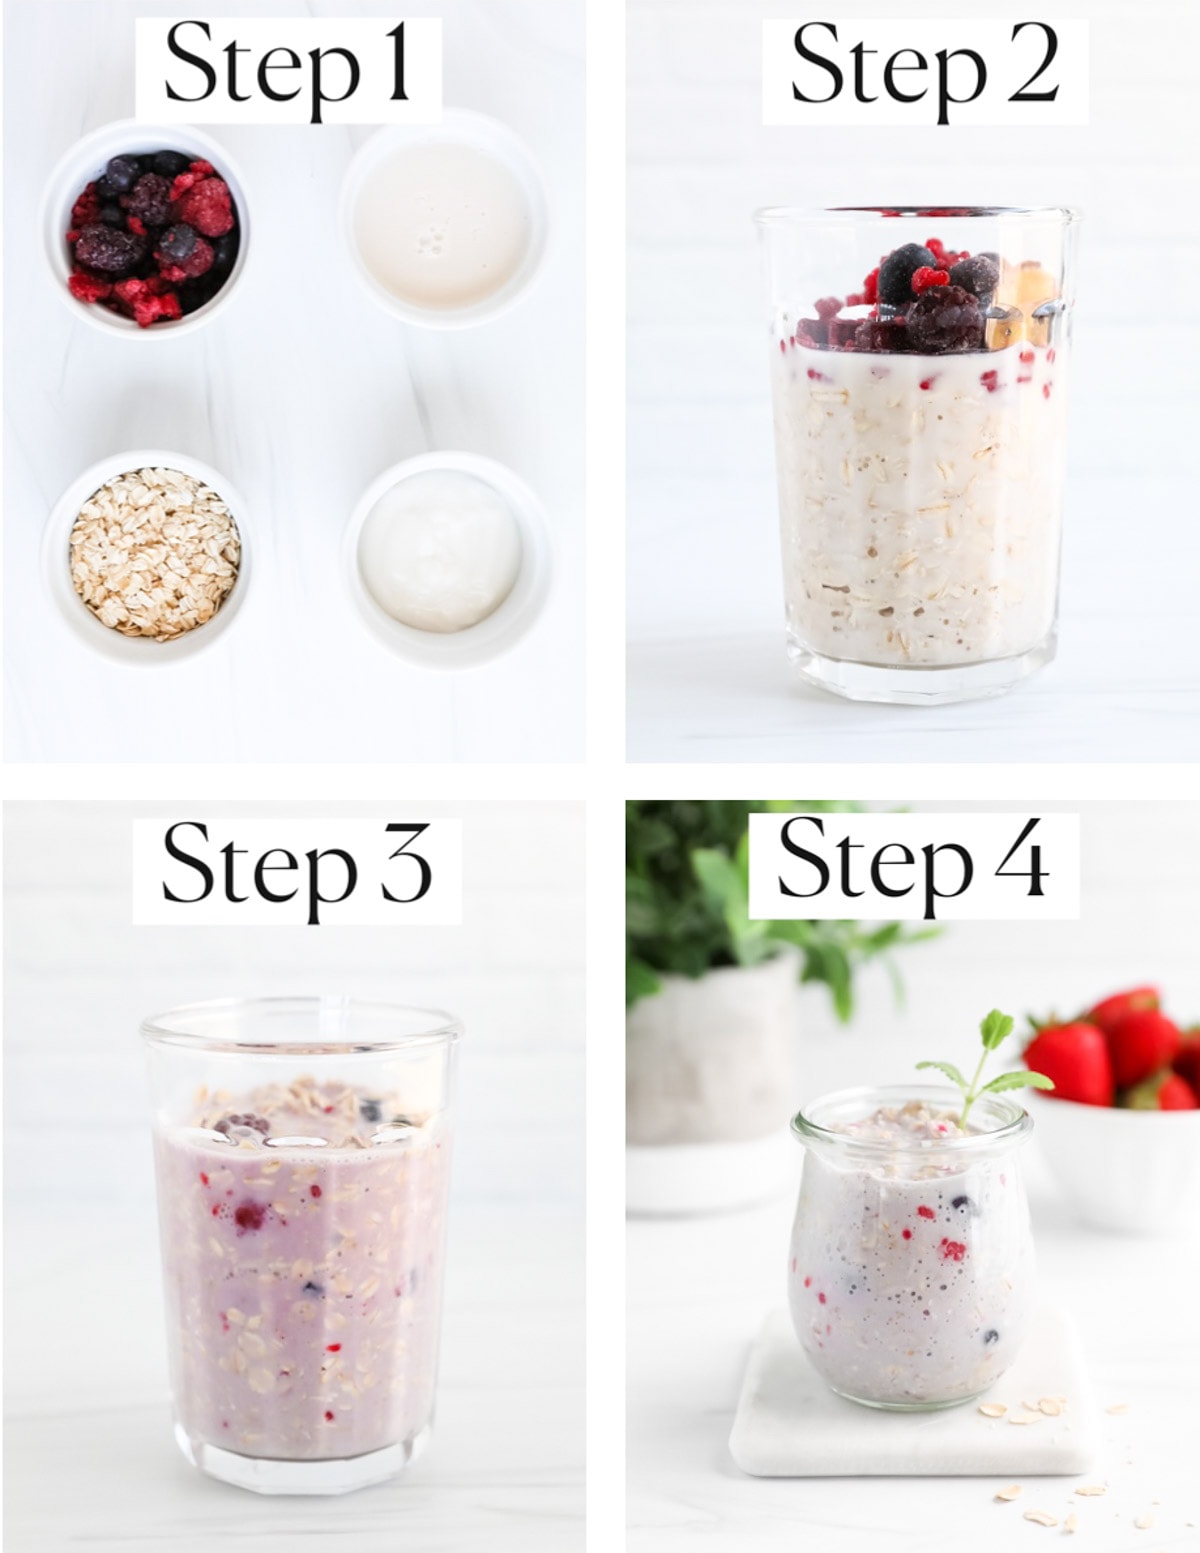 Four images labeled step 1-step 4. Step 1: four small white bowls with ingredients in the, step 2: the ingredients are in a tall glass cup, step 3: the ingredients are mixed together in the glass cup, step 4: a jar of overnight oats.